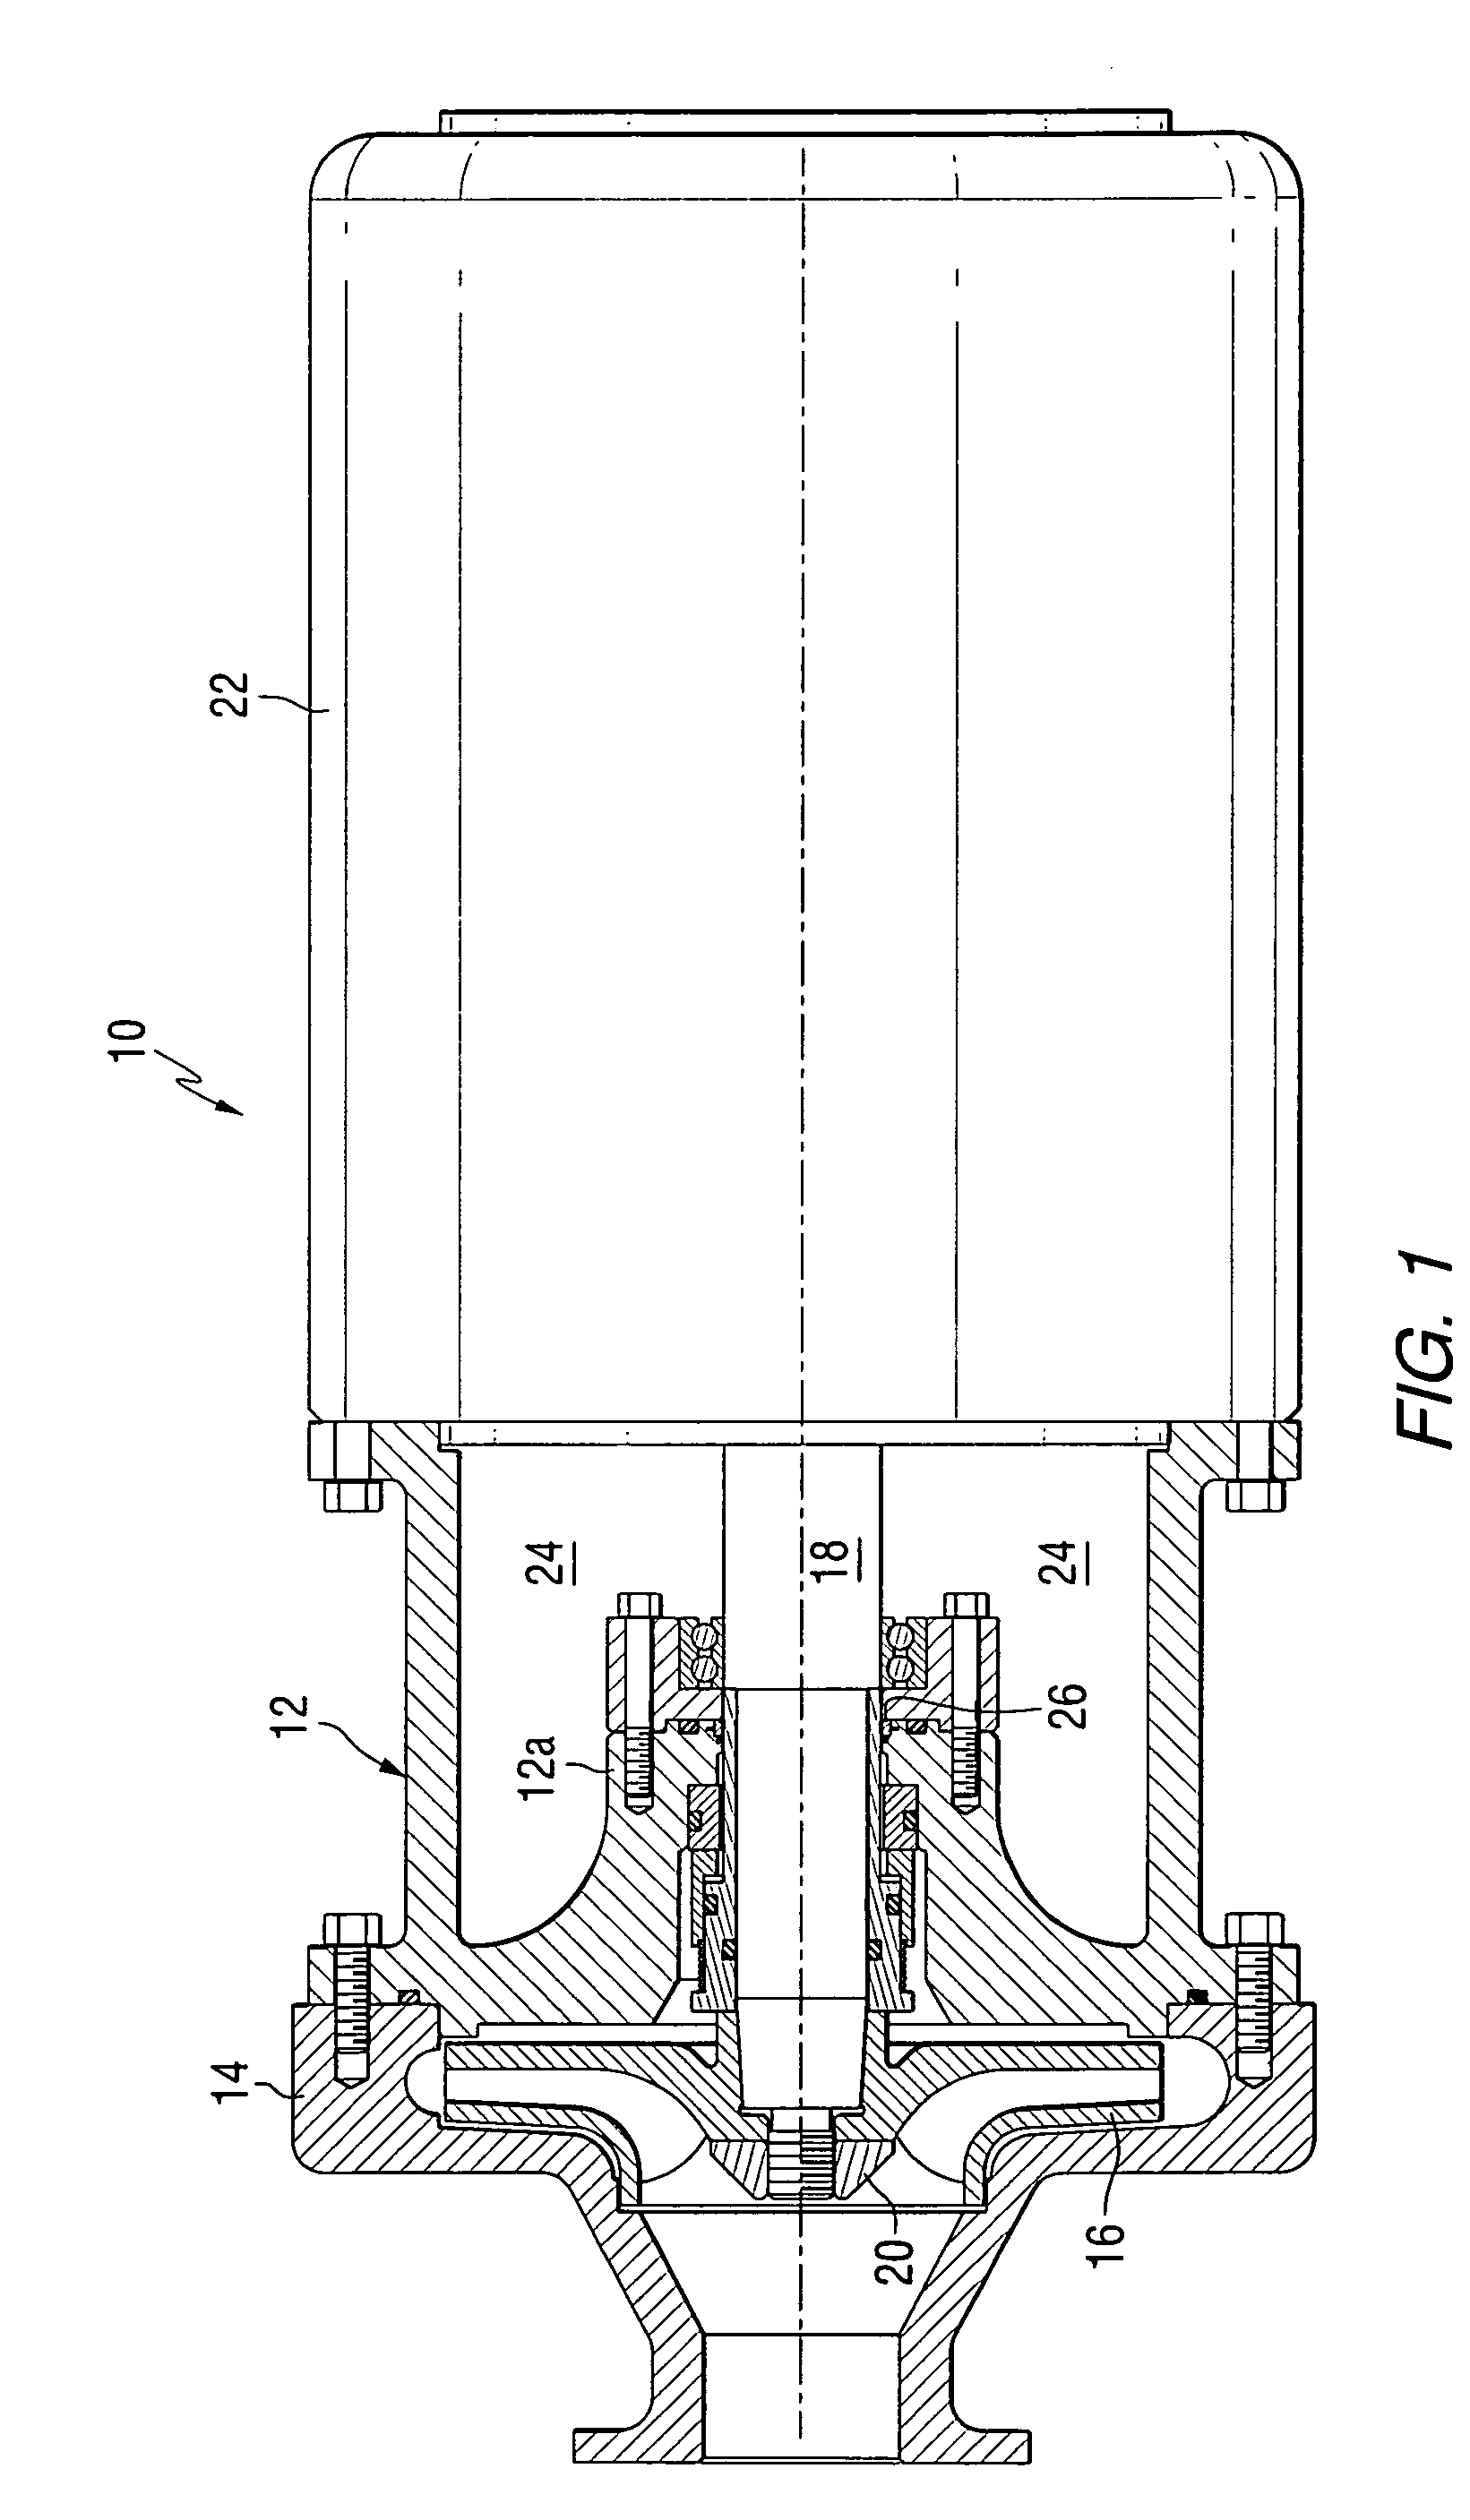 Flow restricting devices in pumps